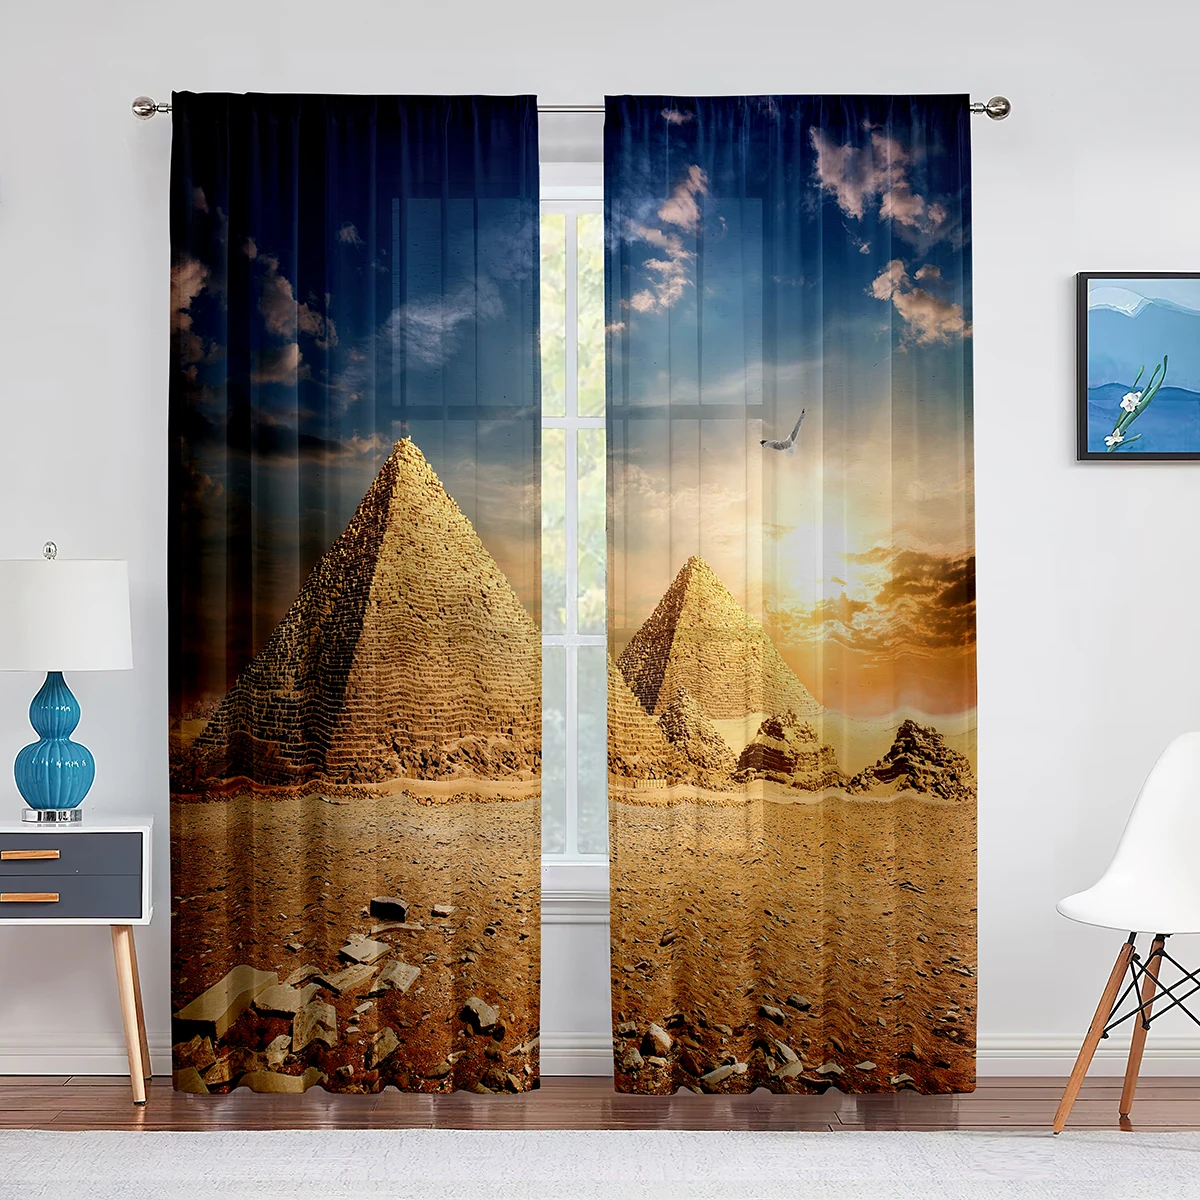 

Old Egyptian Pyramids In Desert Flying Eagle Nature Sunshine Sheer Voile Curtain for Bedroom Living Room Window Tulle Curtains